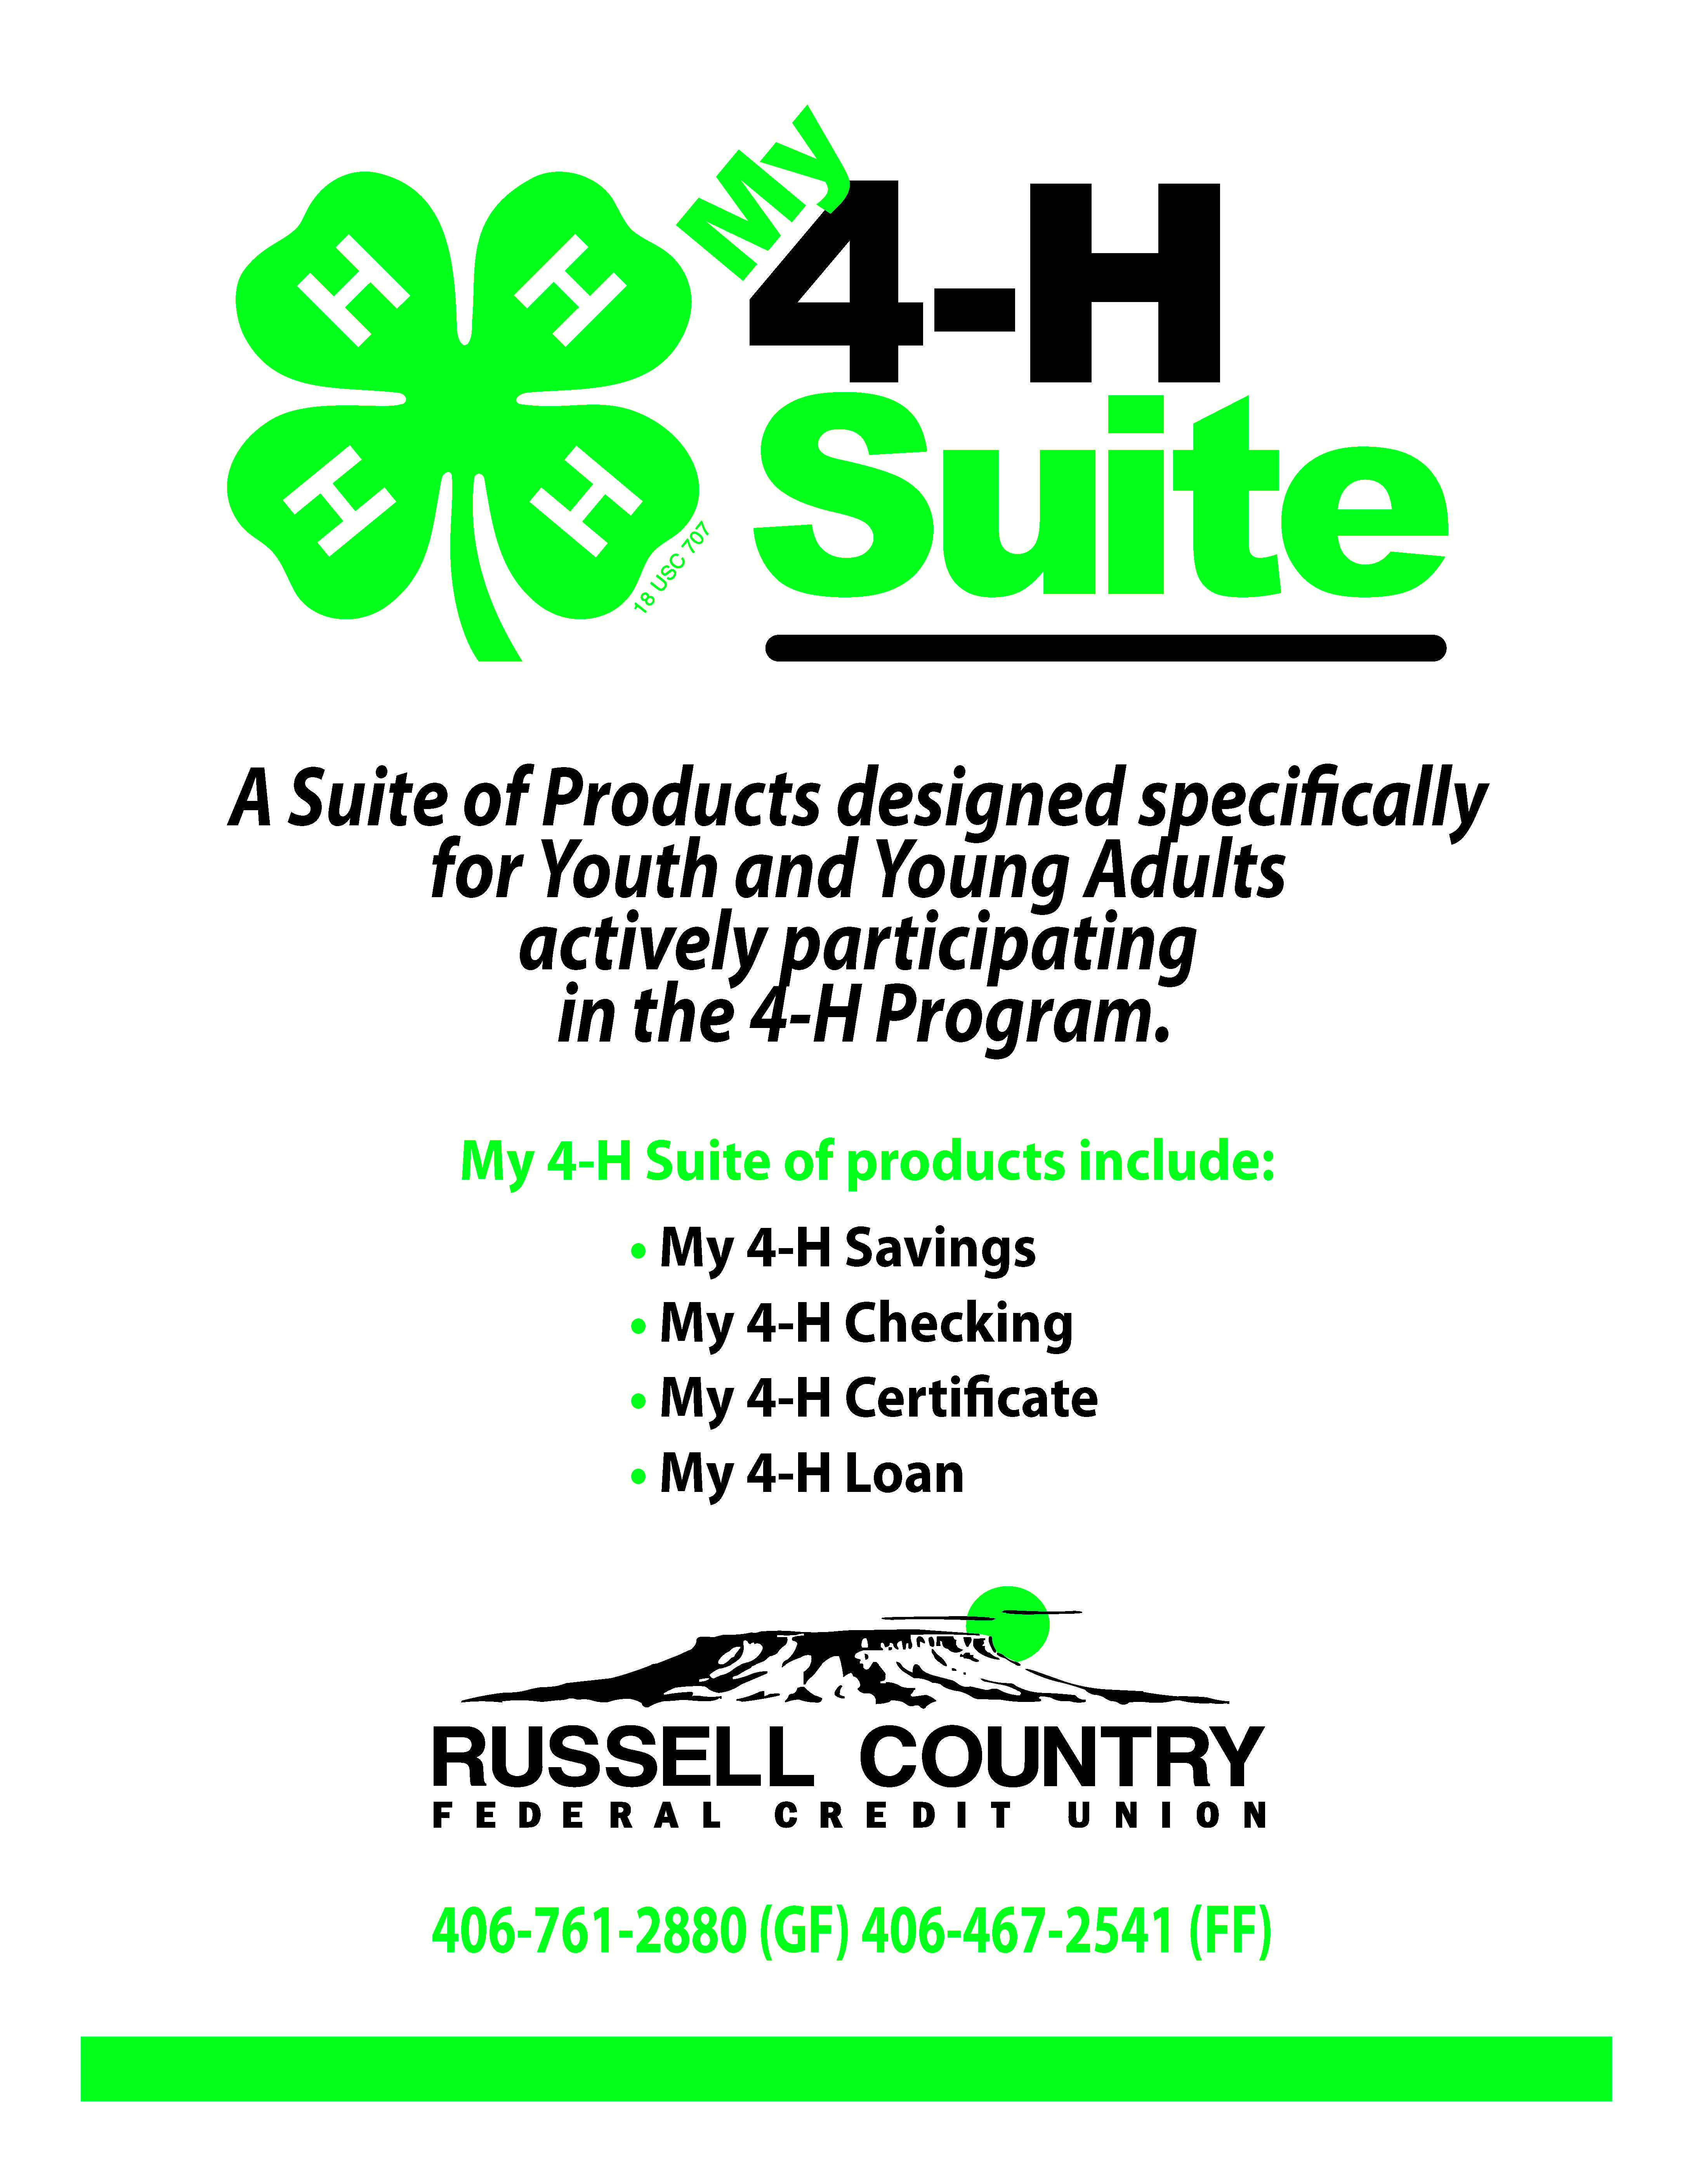 An image with the green 4H clover logo and the Russell Country Federal Credit Union butte logo and the text My 4H Suite A suite of products designed specifically for youth and young adults actively participating in the 4H program. My 4H Suite of products includes my 4h savings my 4h checking my 4h certificate my 4h loan Russell Country Federal Credit Union 406-761-2880 GF 406-467-2541 FF